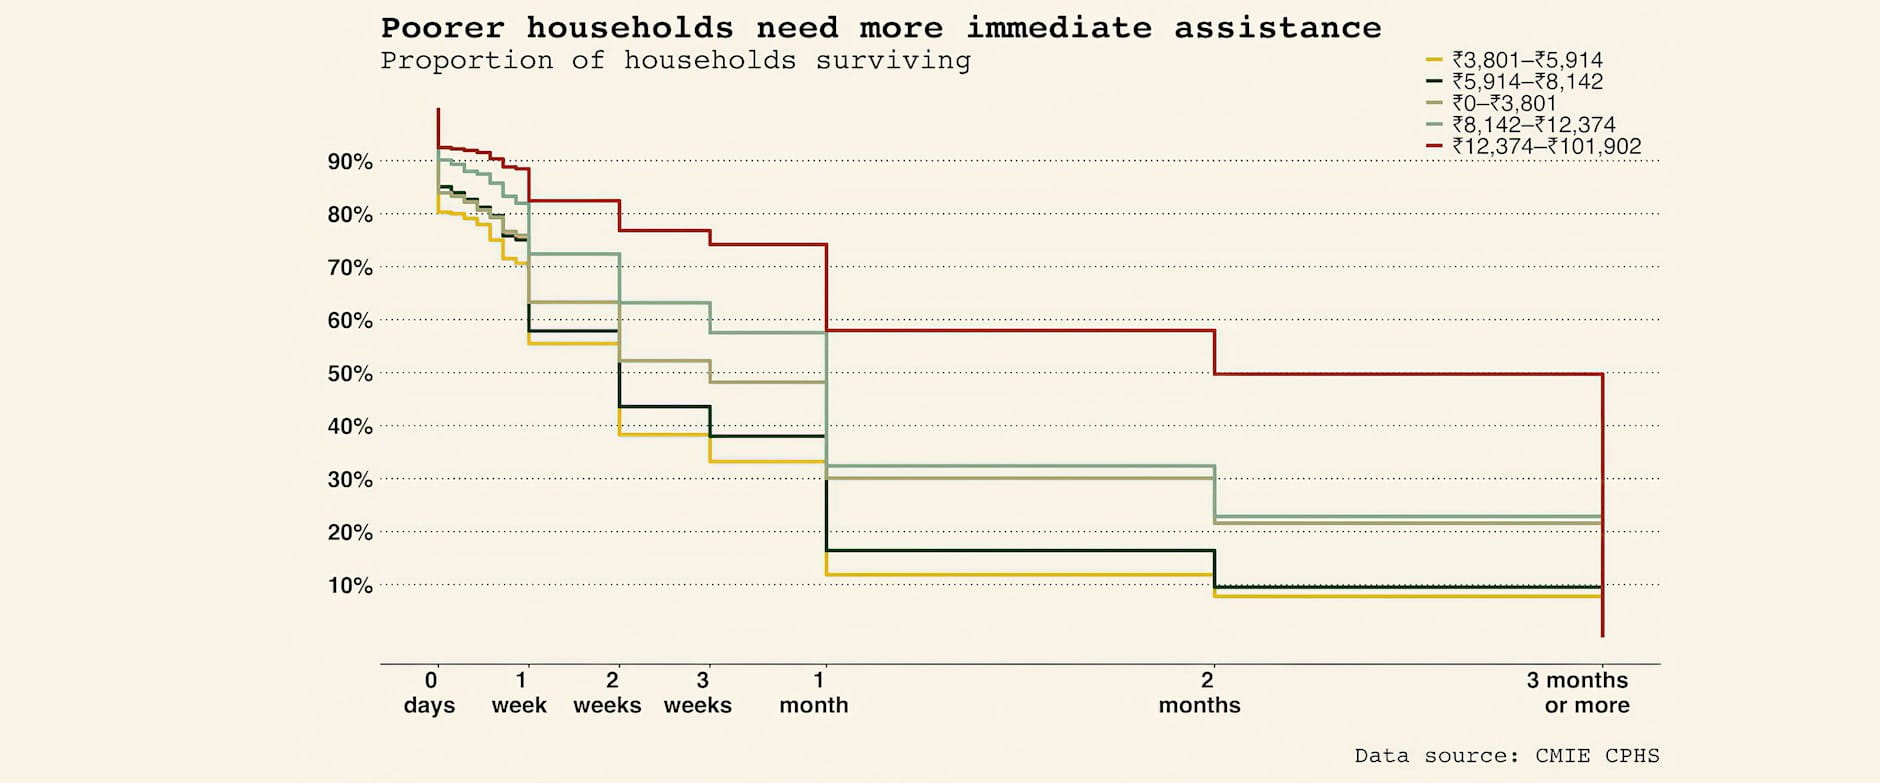 Figure showing that poorer households need more resources